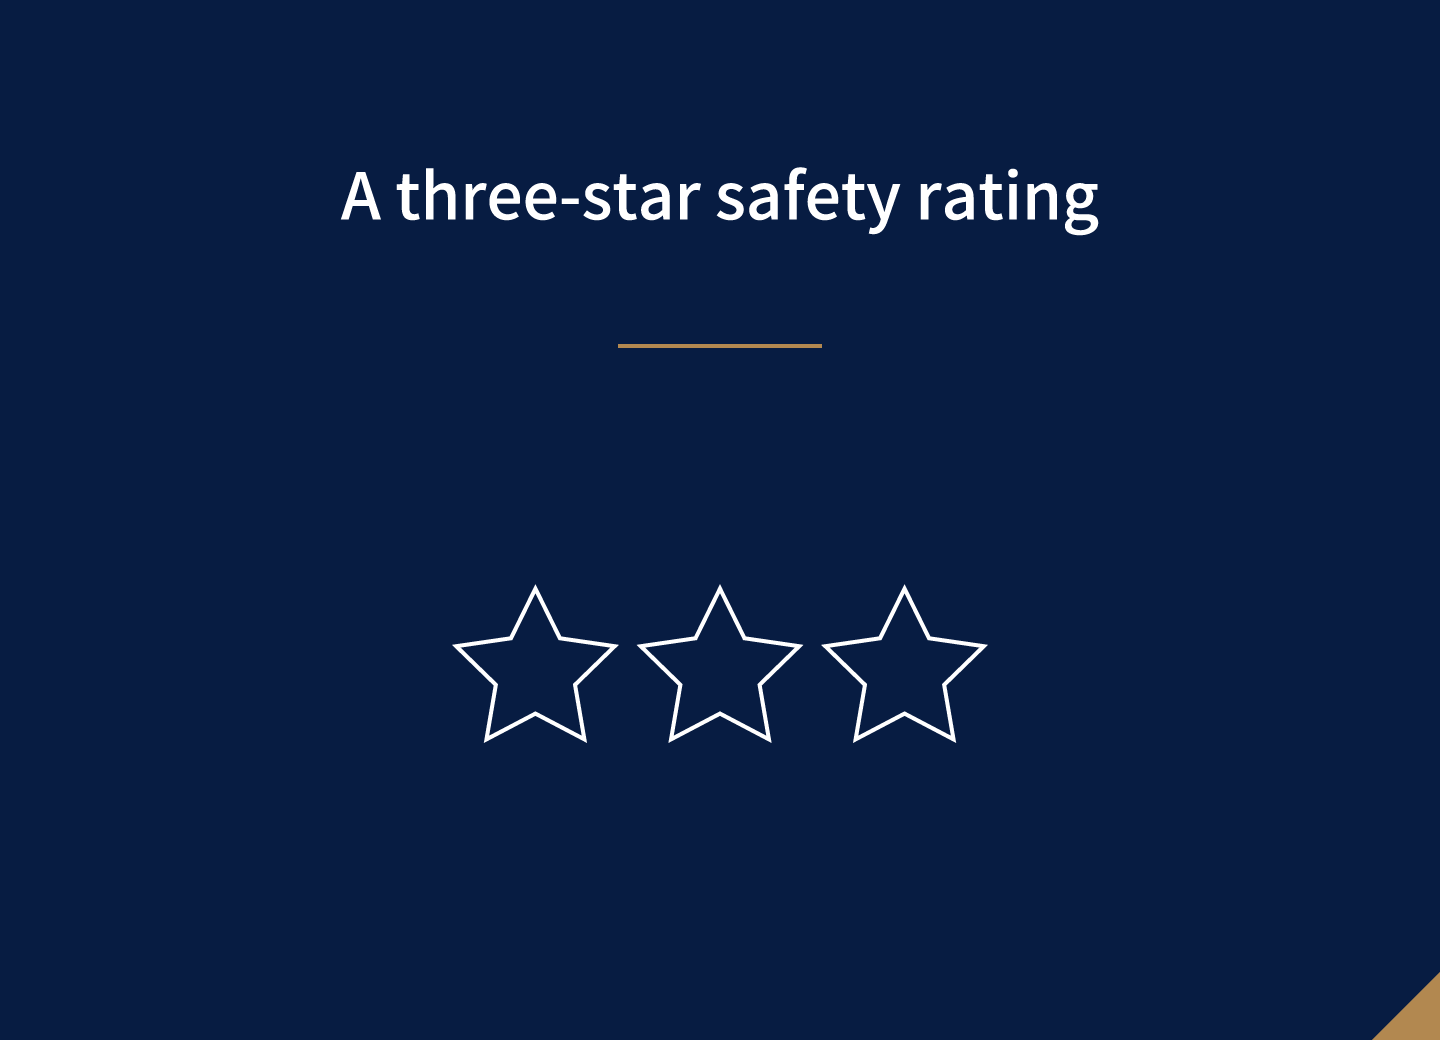 A three-star safety rating